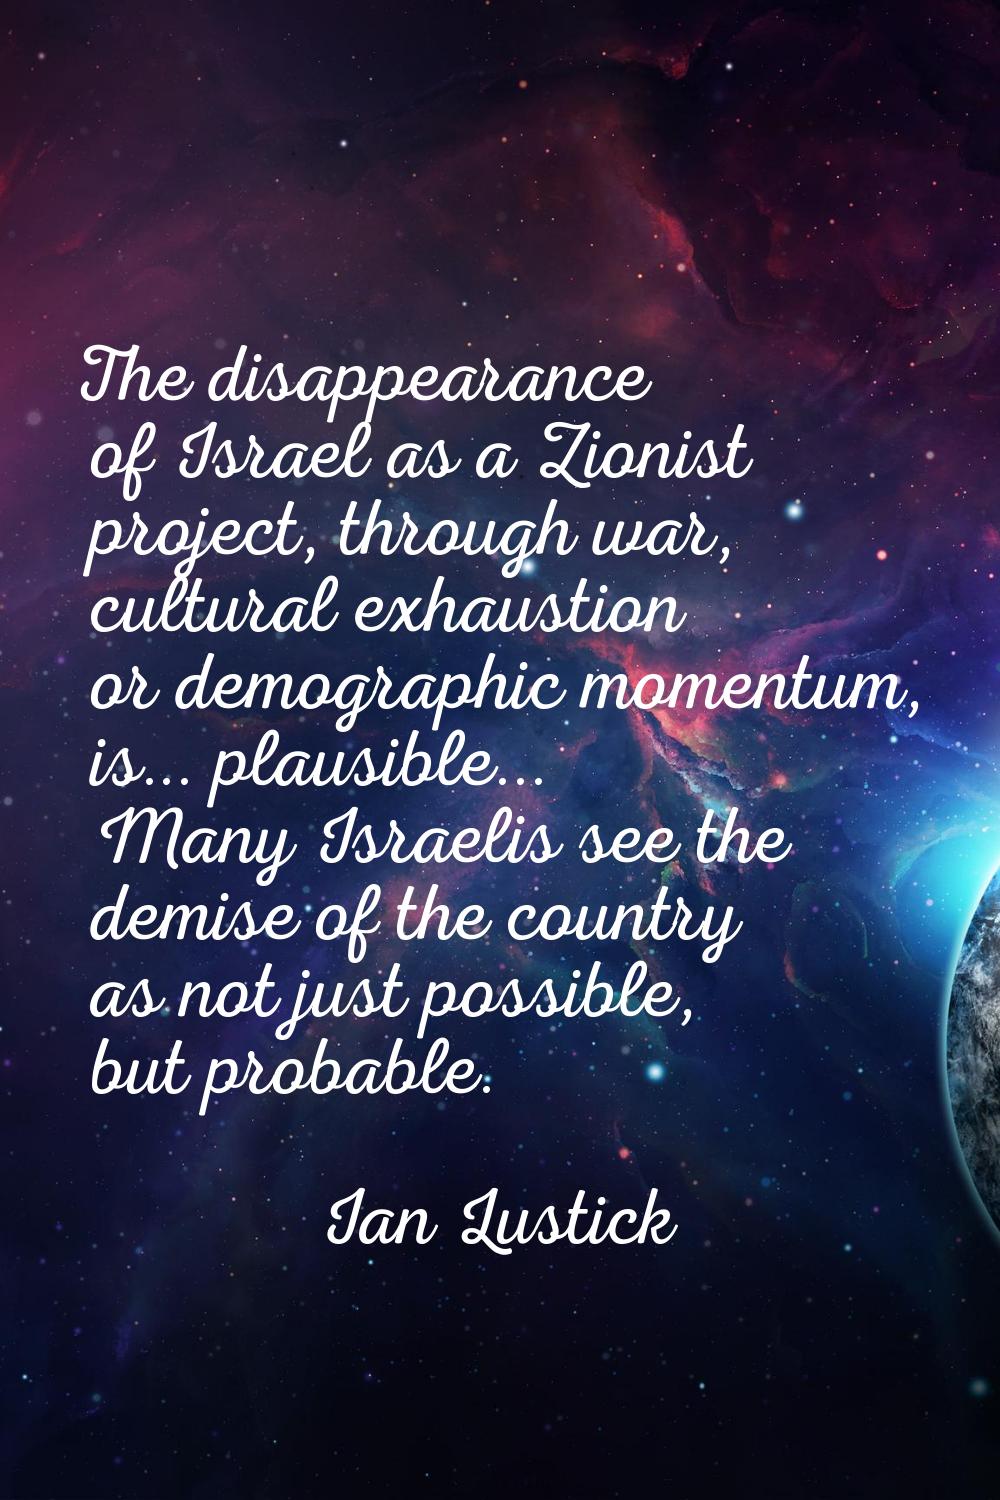 The disappearance of Israel as a Zionist project, through war, cultural exhaustion or demographic m